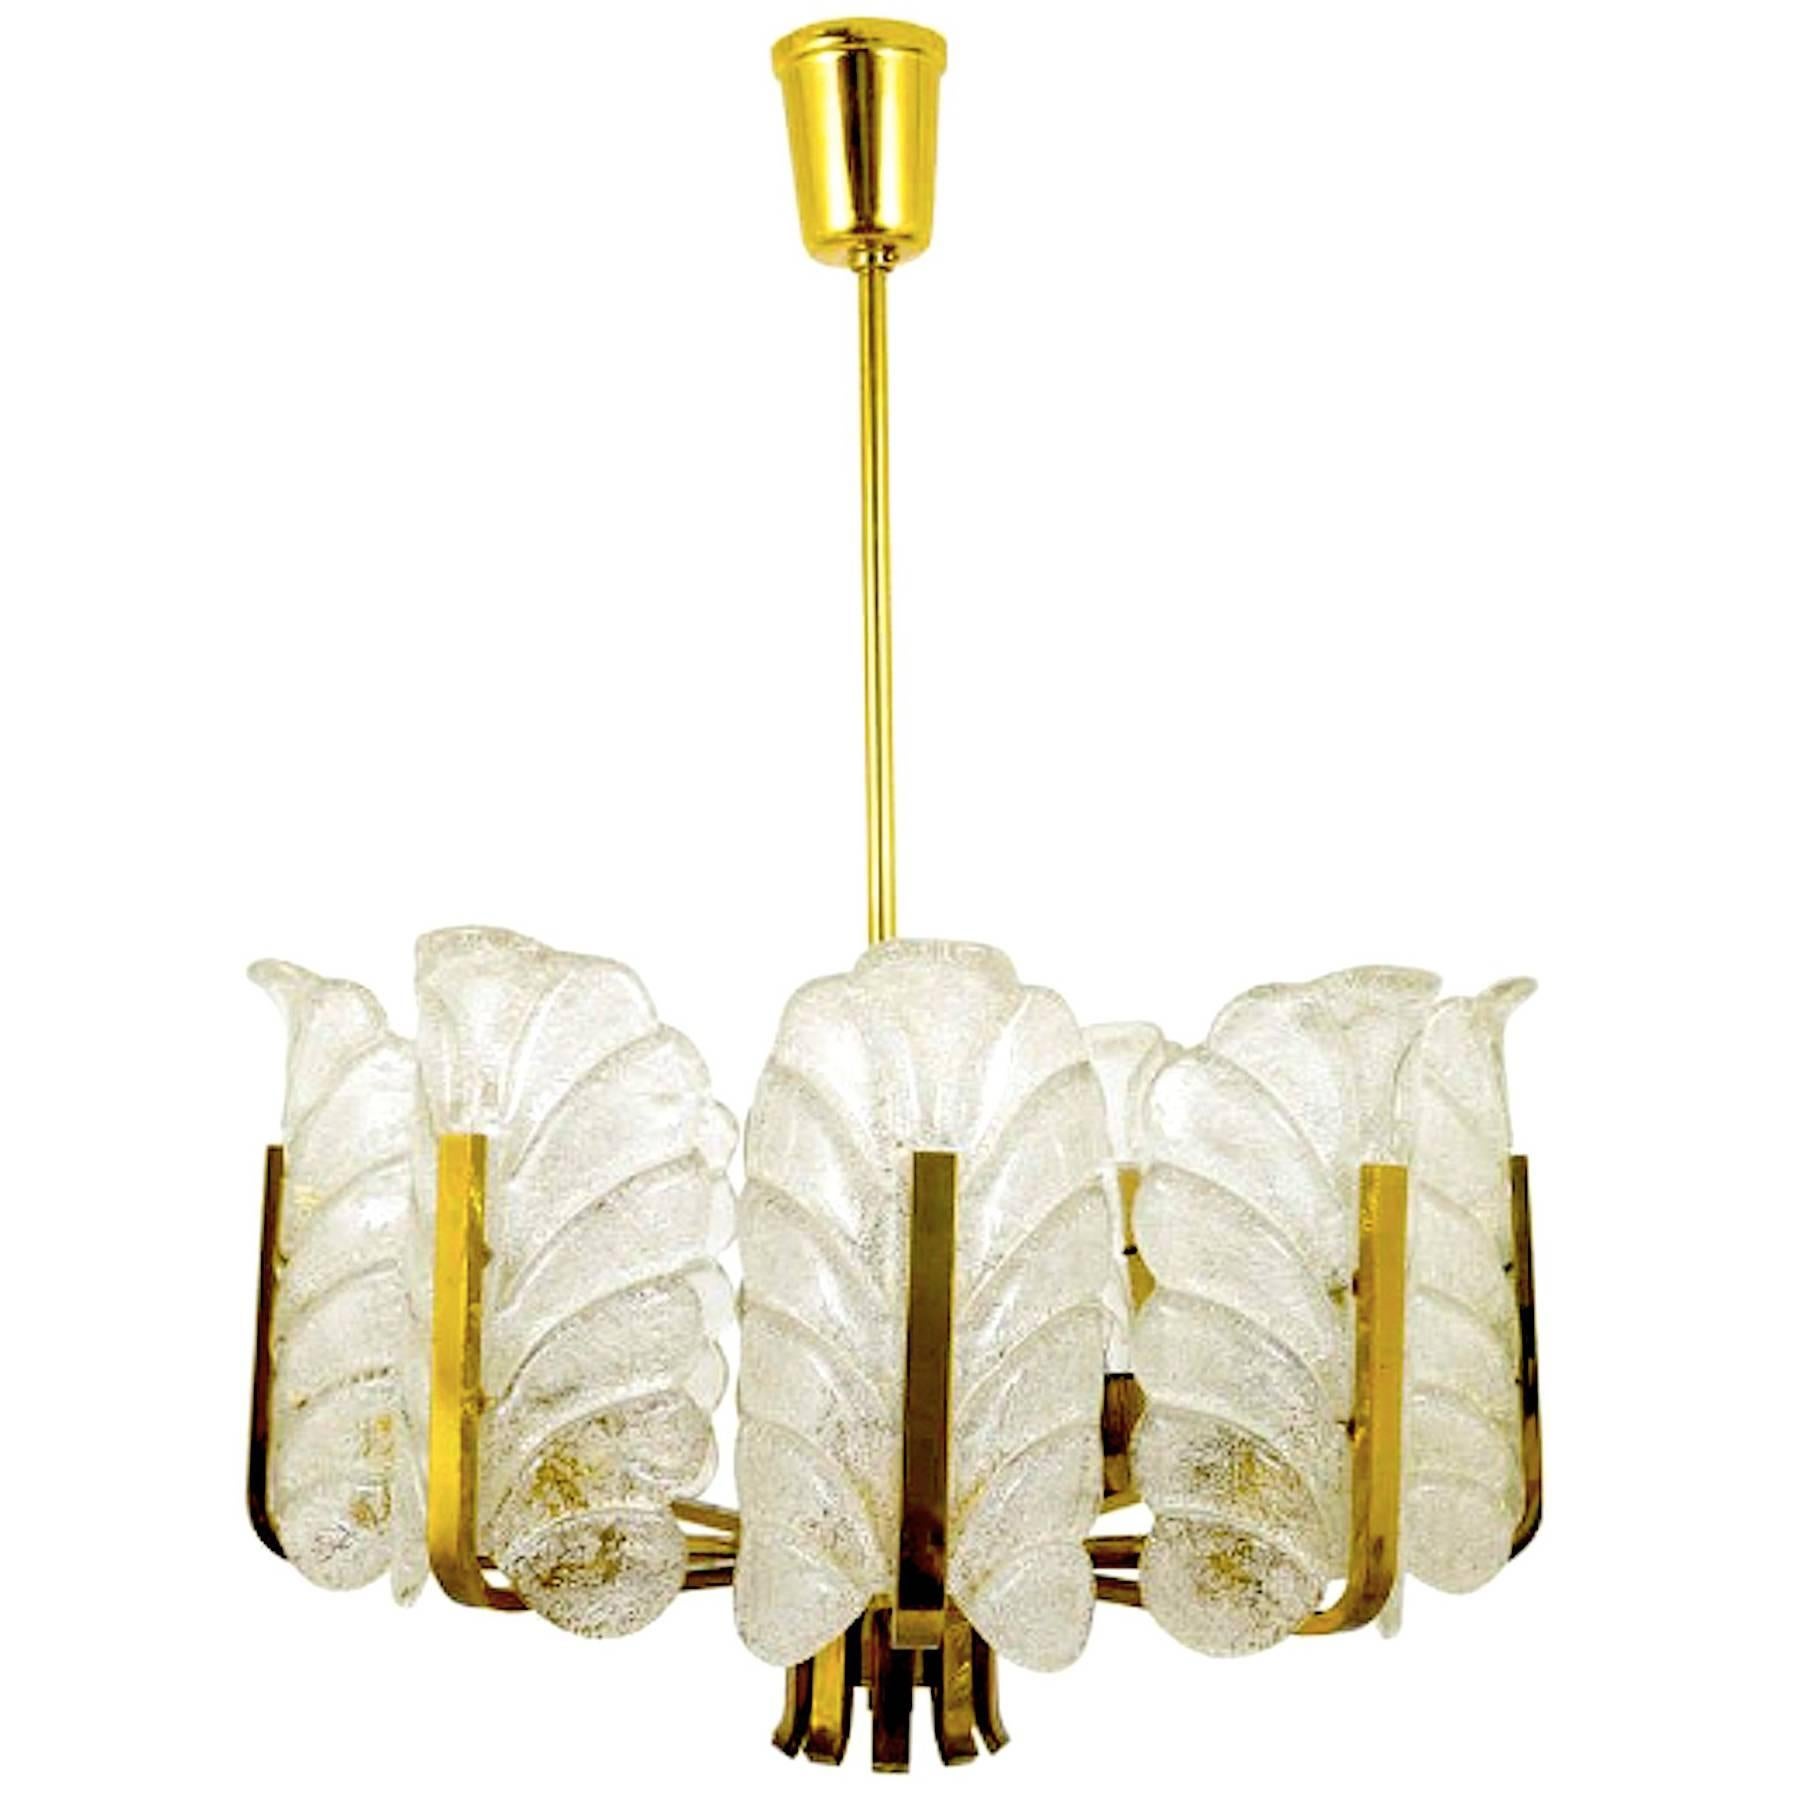 A wonderful, elegant glass chandelier by Carl Fagerlund for Orrefors, Sweden, circa 1960s. It is composed of 7 textured Barovier & Toso Murano glass leaves and a 7-light brass frame.
A real stunning ORIGINAL vintage period lamp !! Model made in